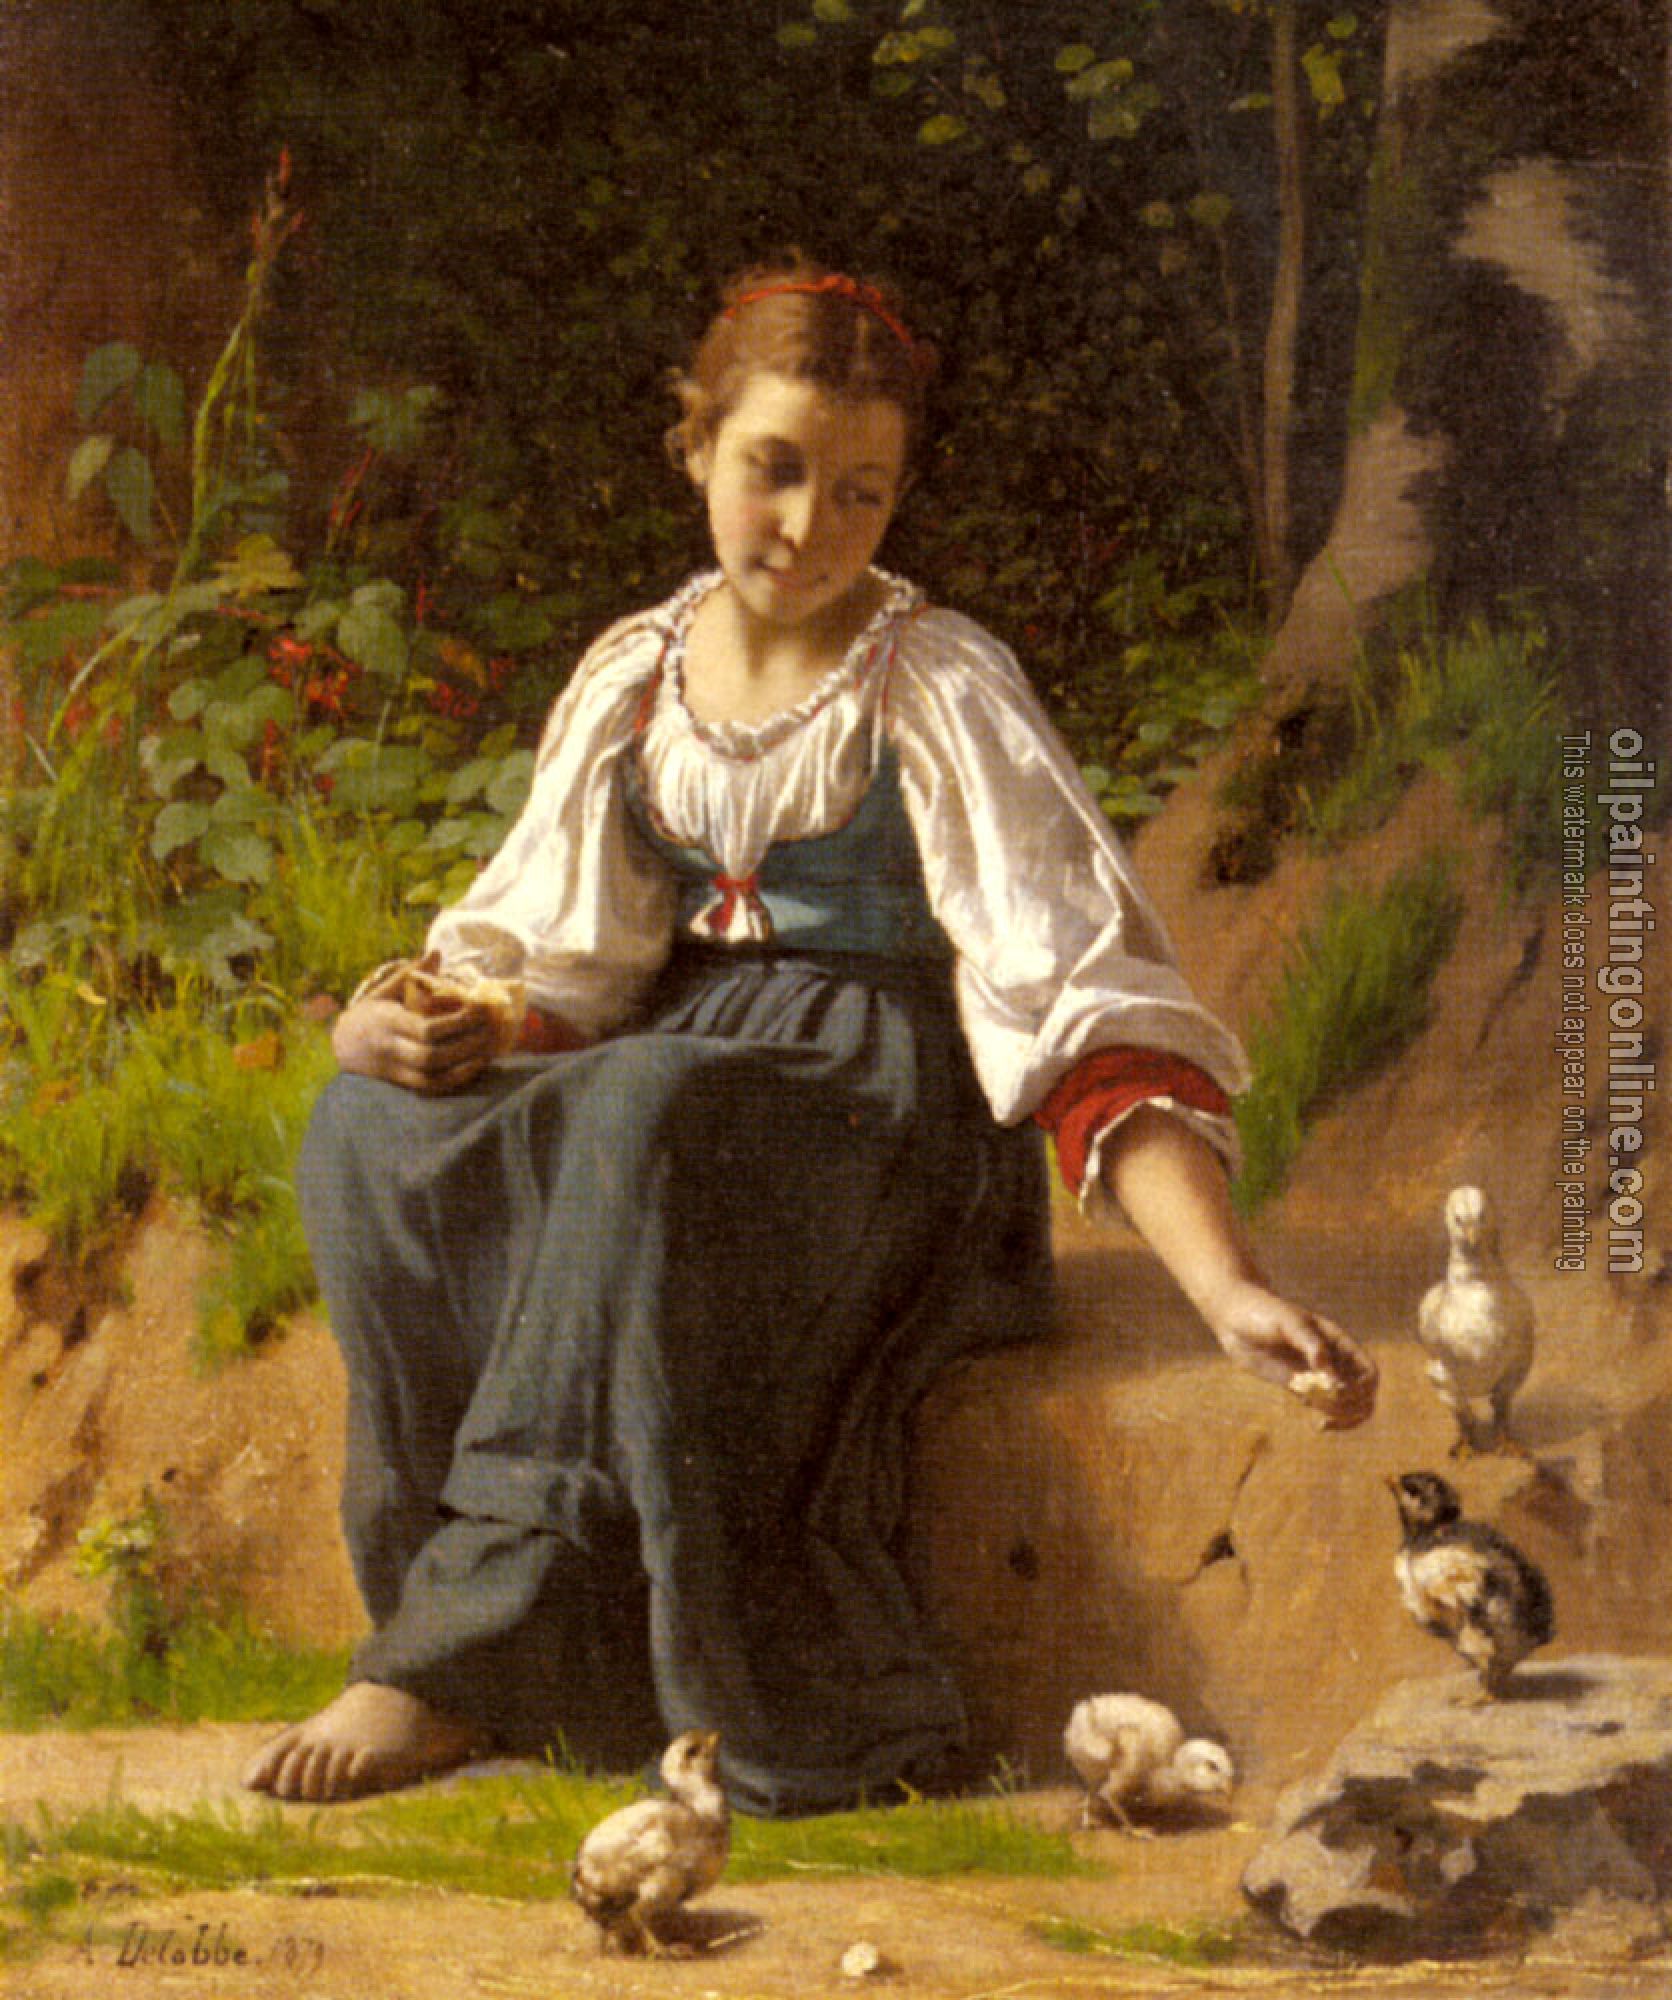 Delobbe, Francois Alfred - A Young Girl feeding Baby Chicks